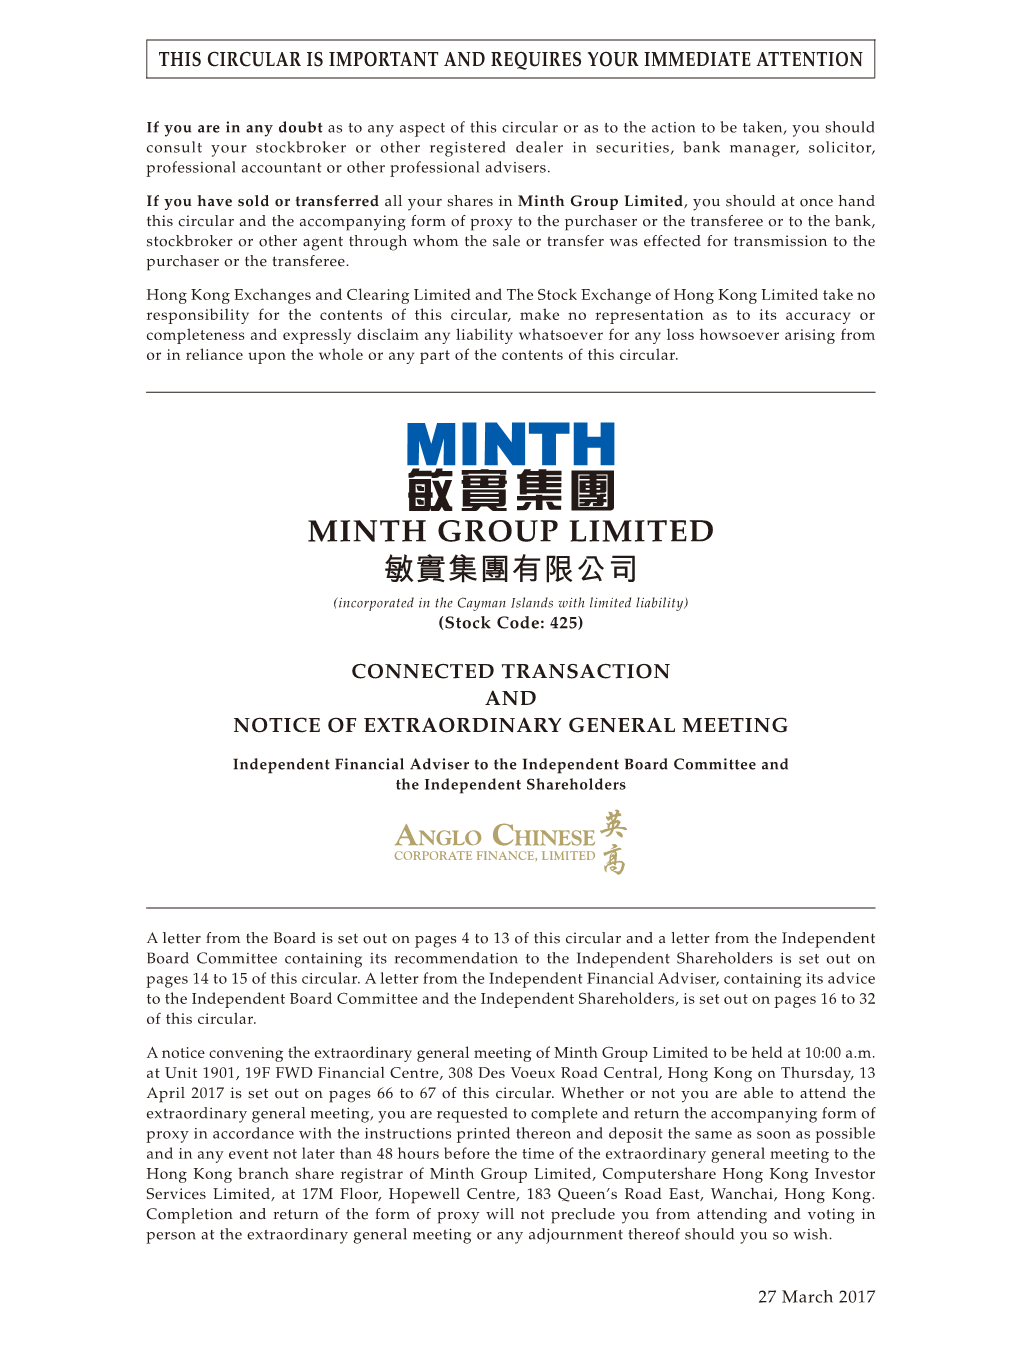 Connected Transaction and Notice of Extraordinary General Meeting